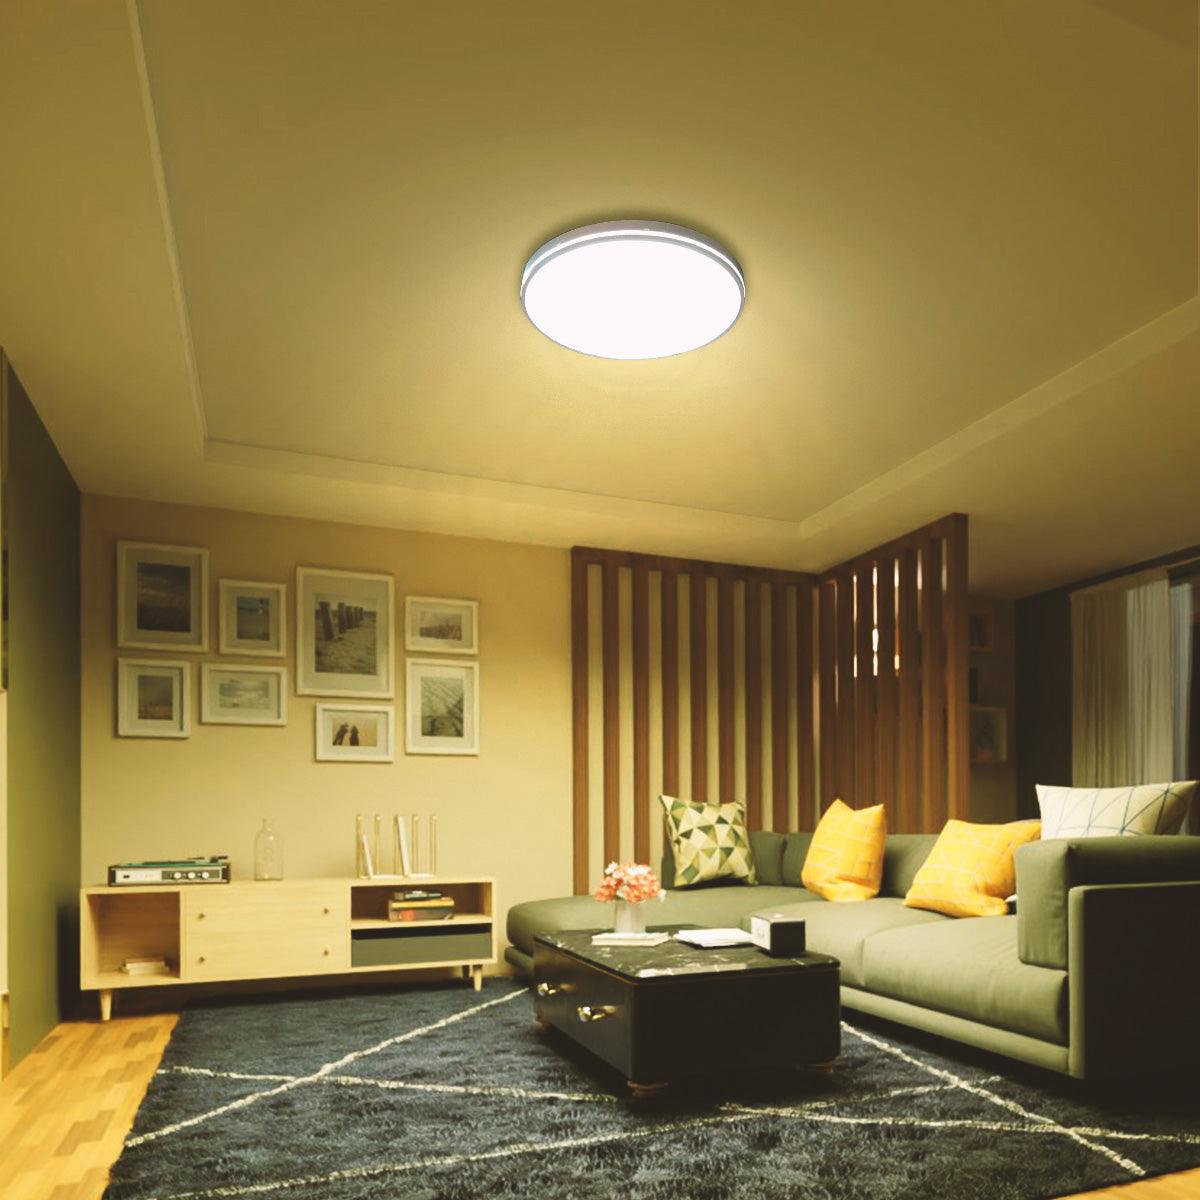 Philips Dome Ceiling light